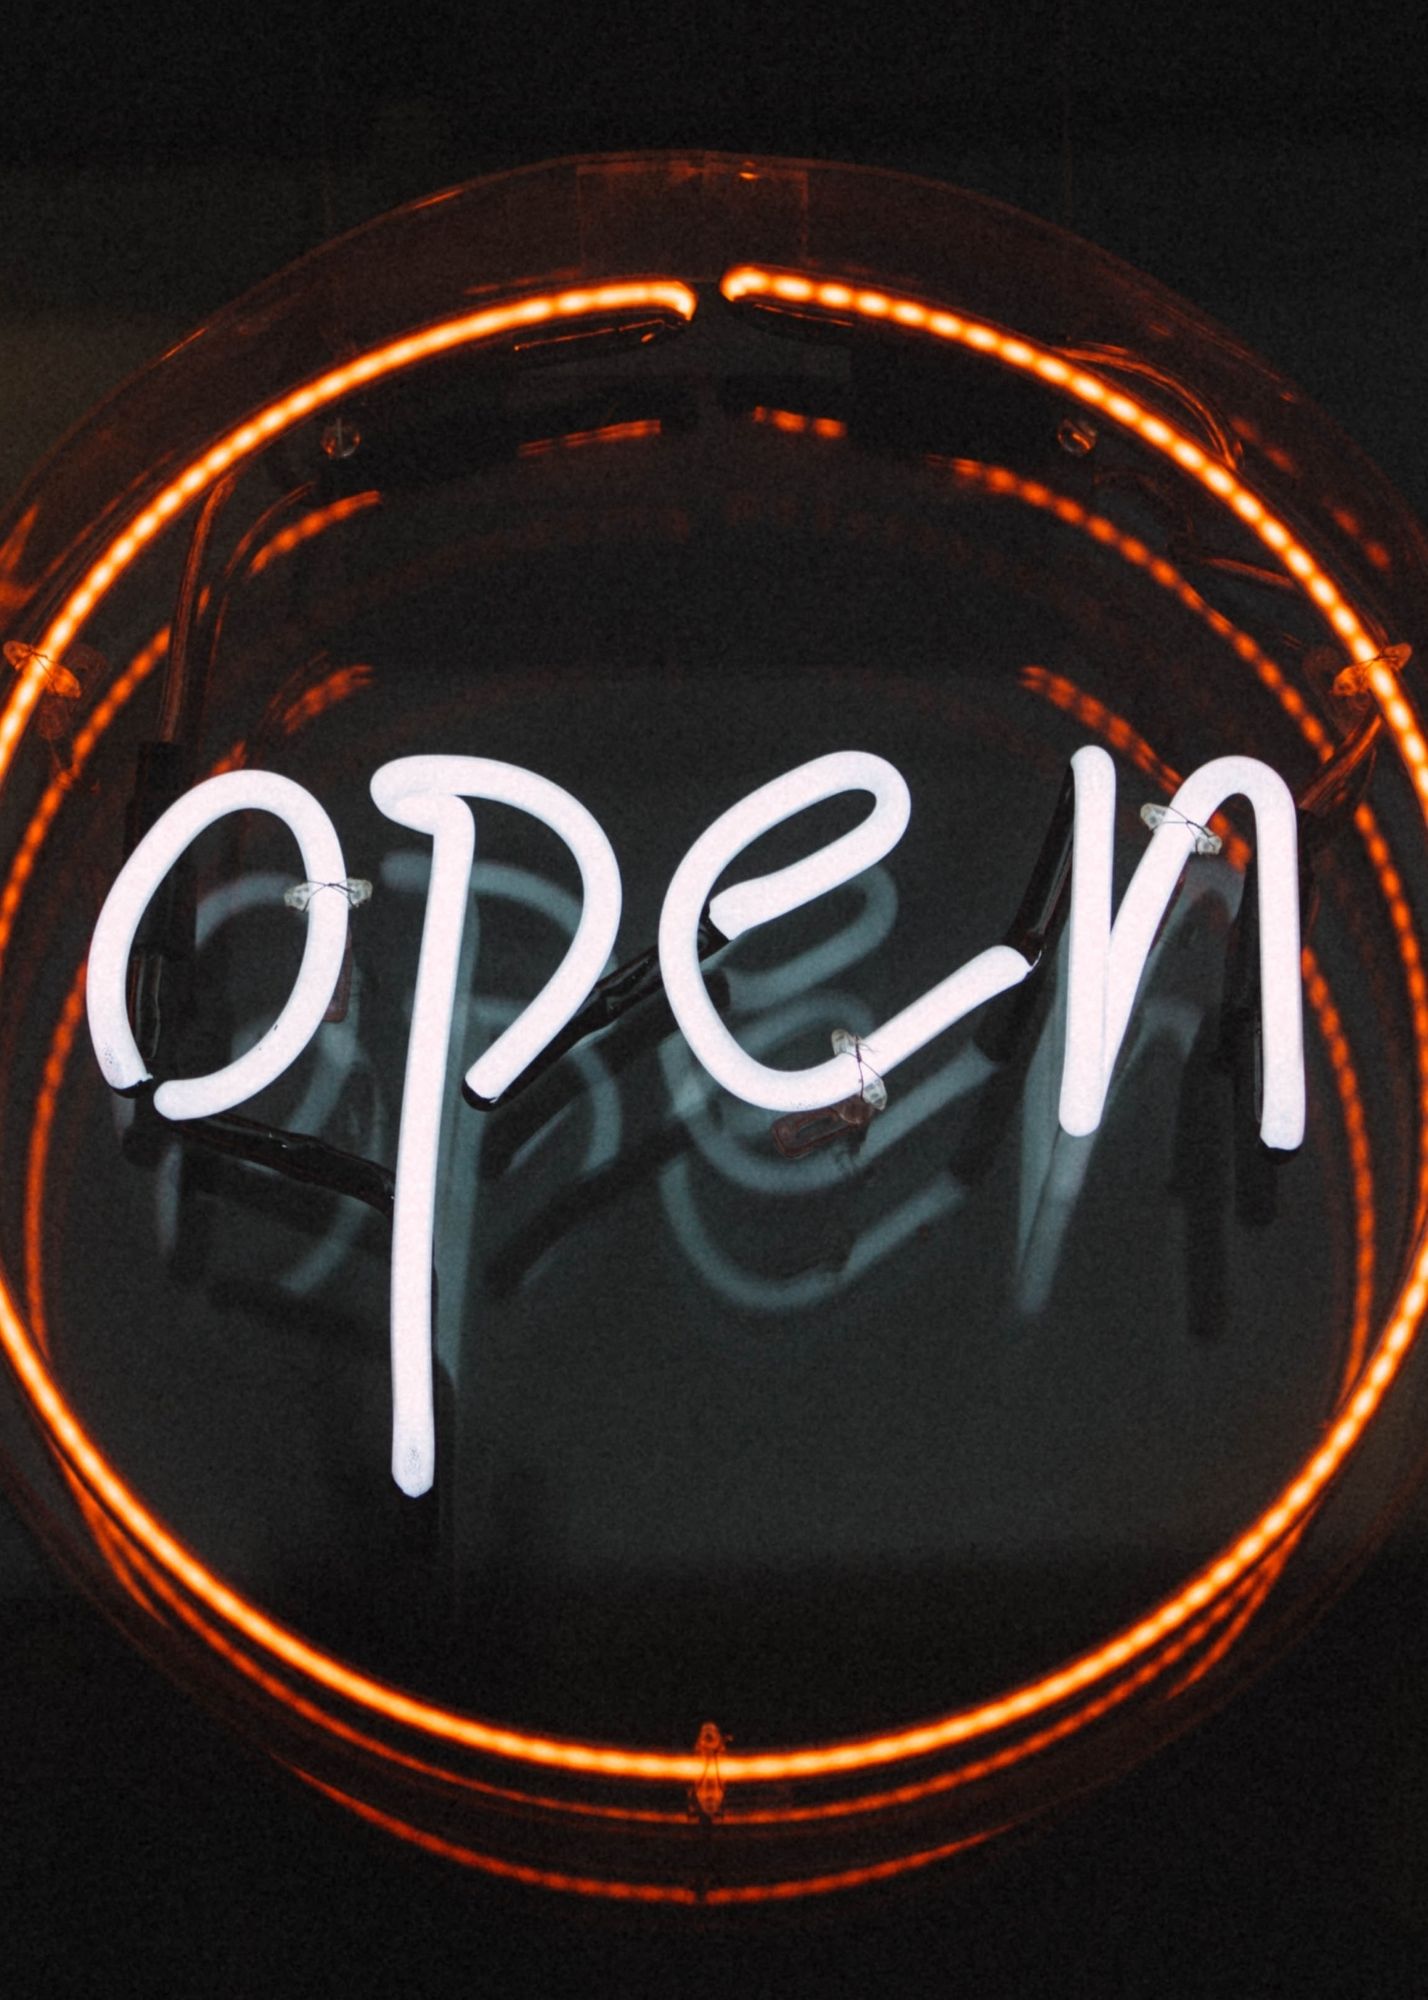 Open is written inside a red circle on a black background.